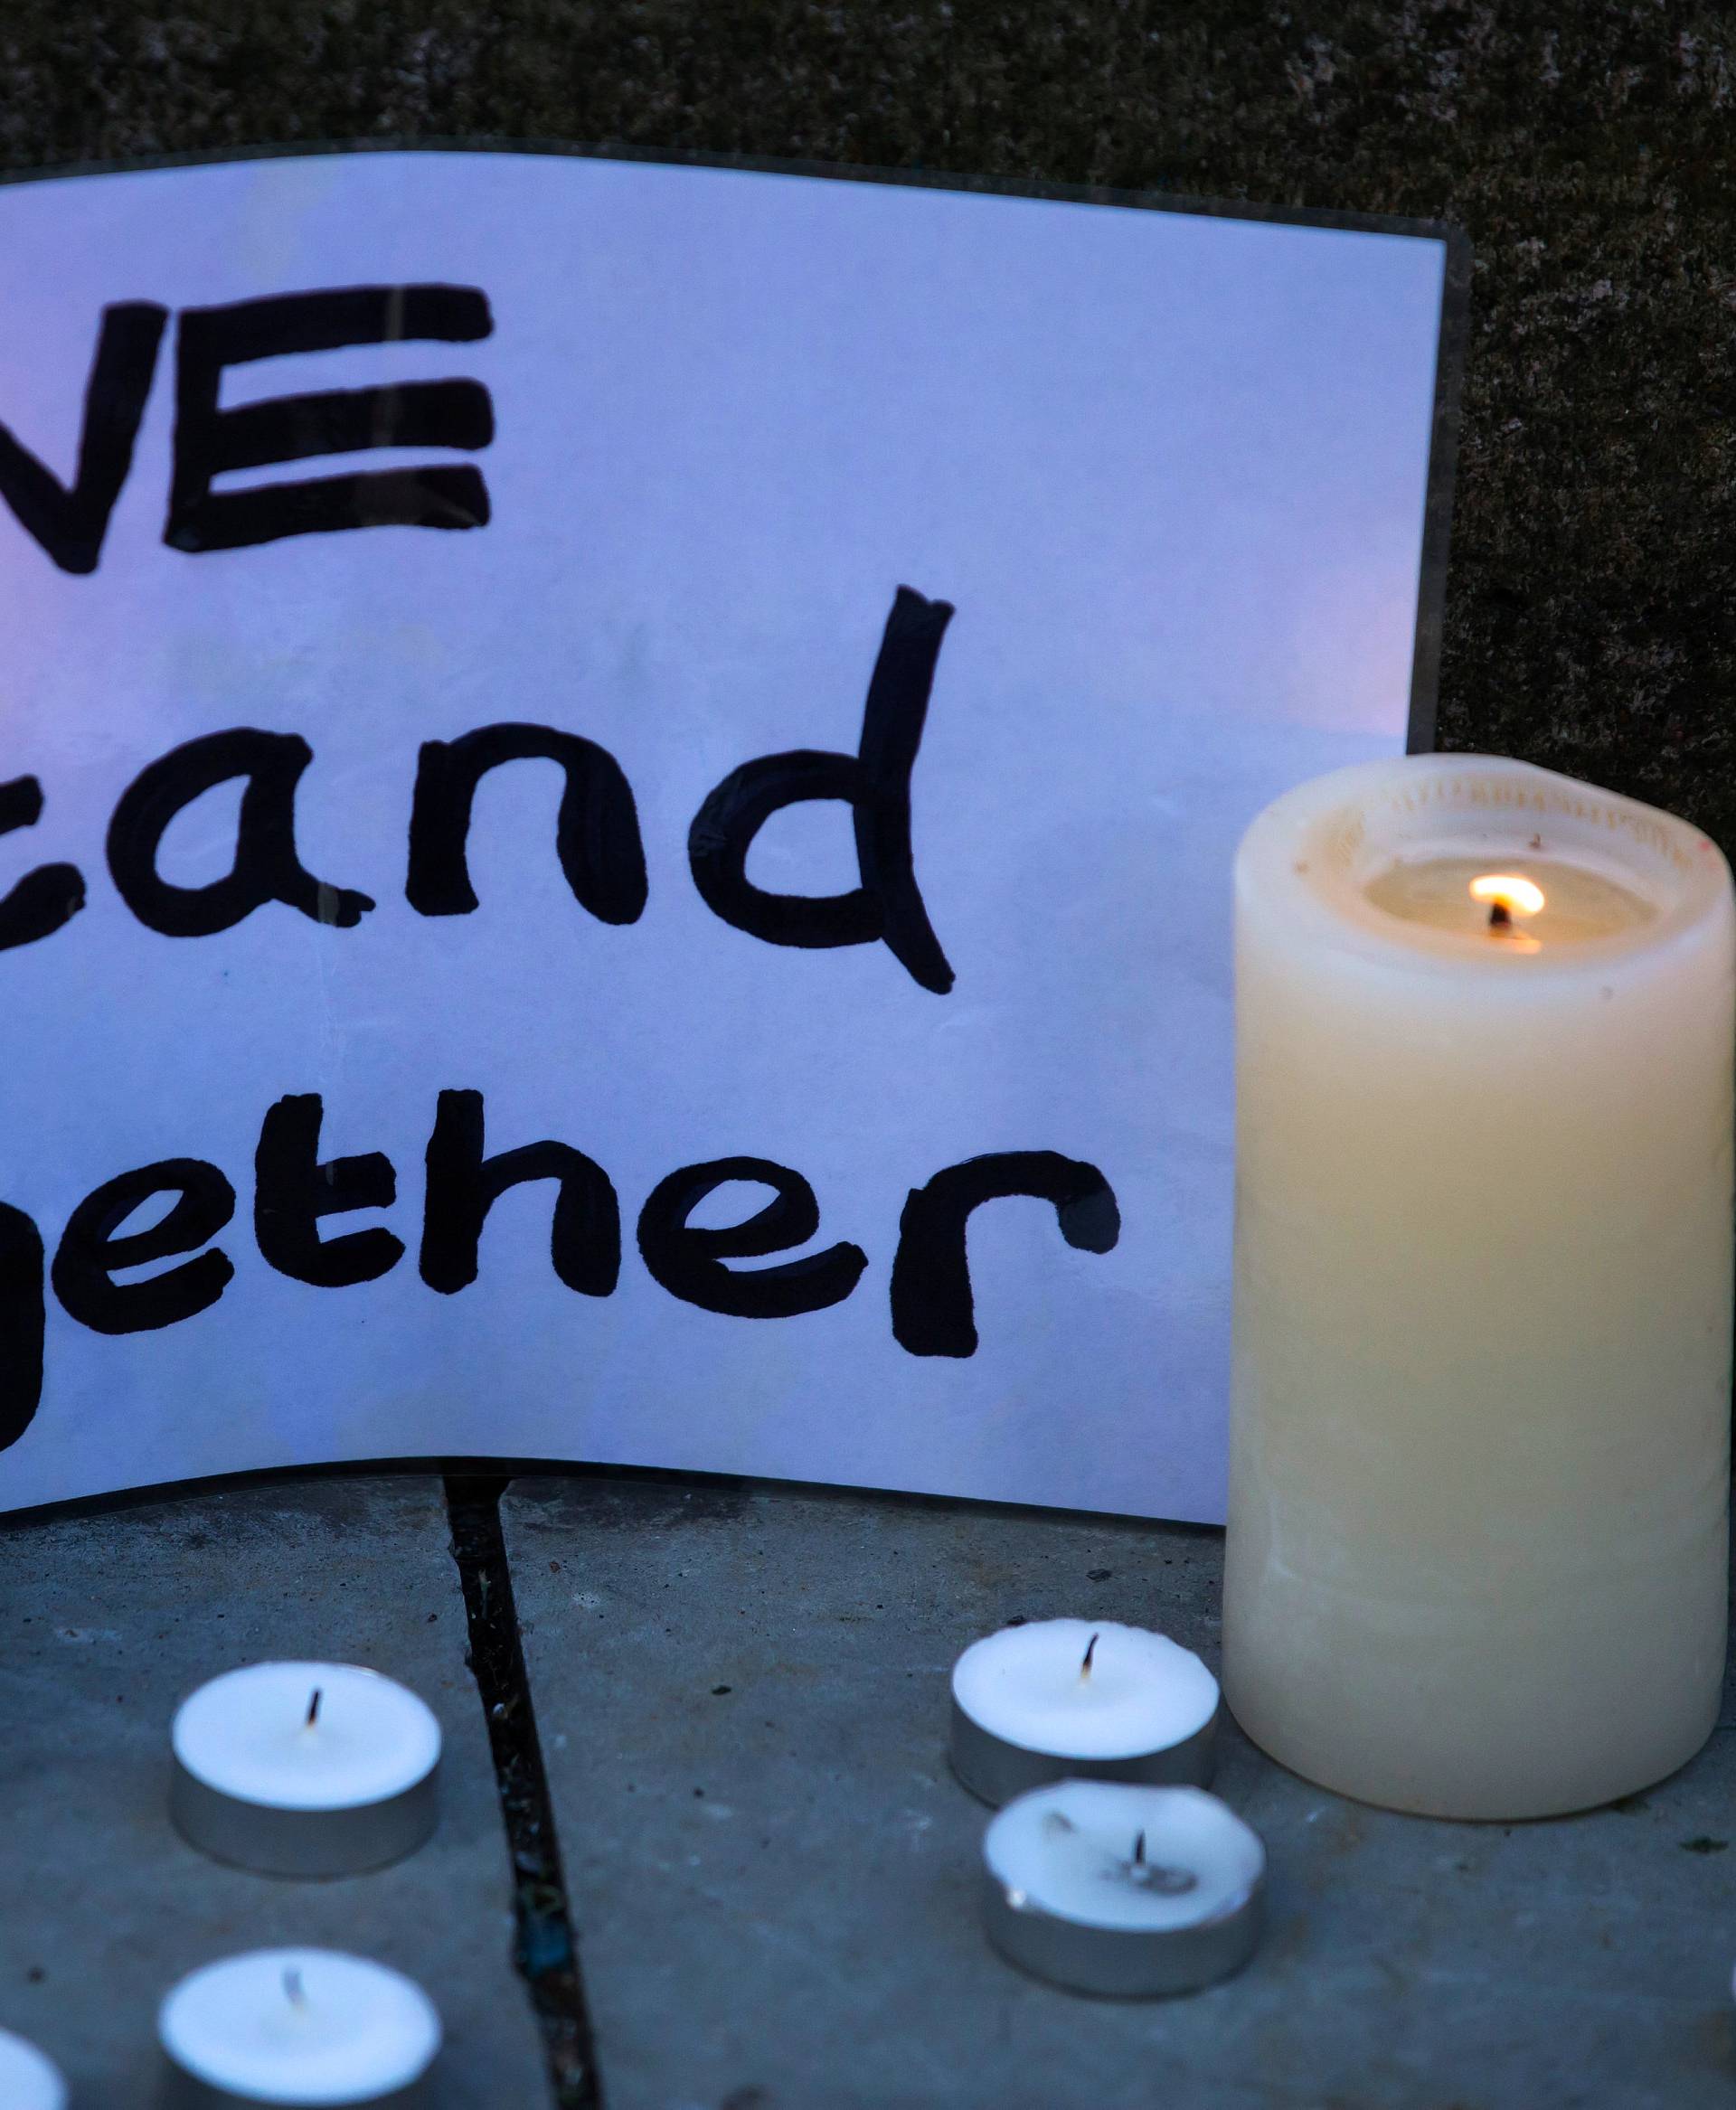 Candles and a message of condolence are left for the victims of the Manchester Arena attack in central Manchester, Britain